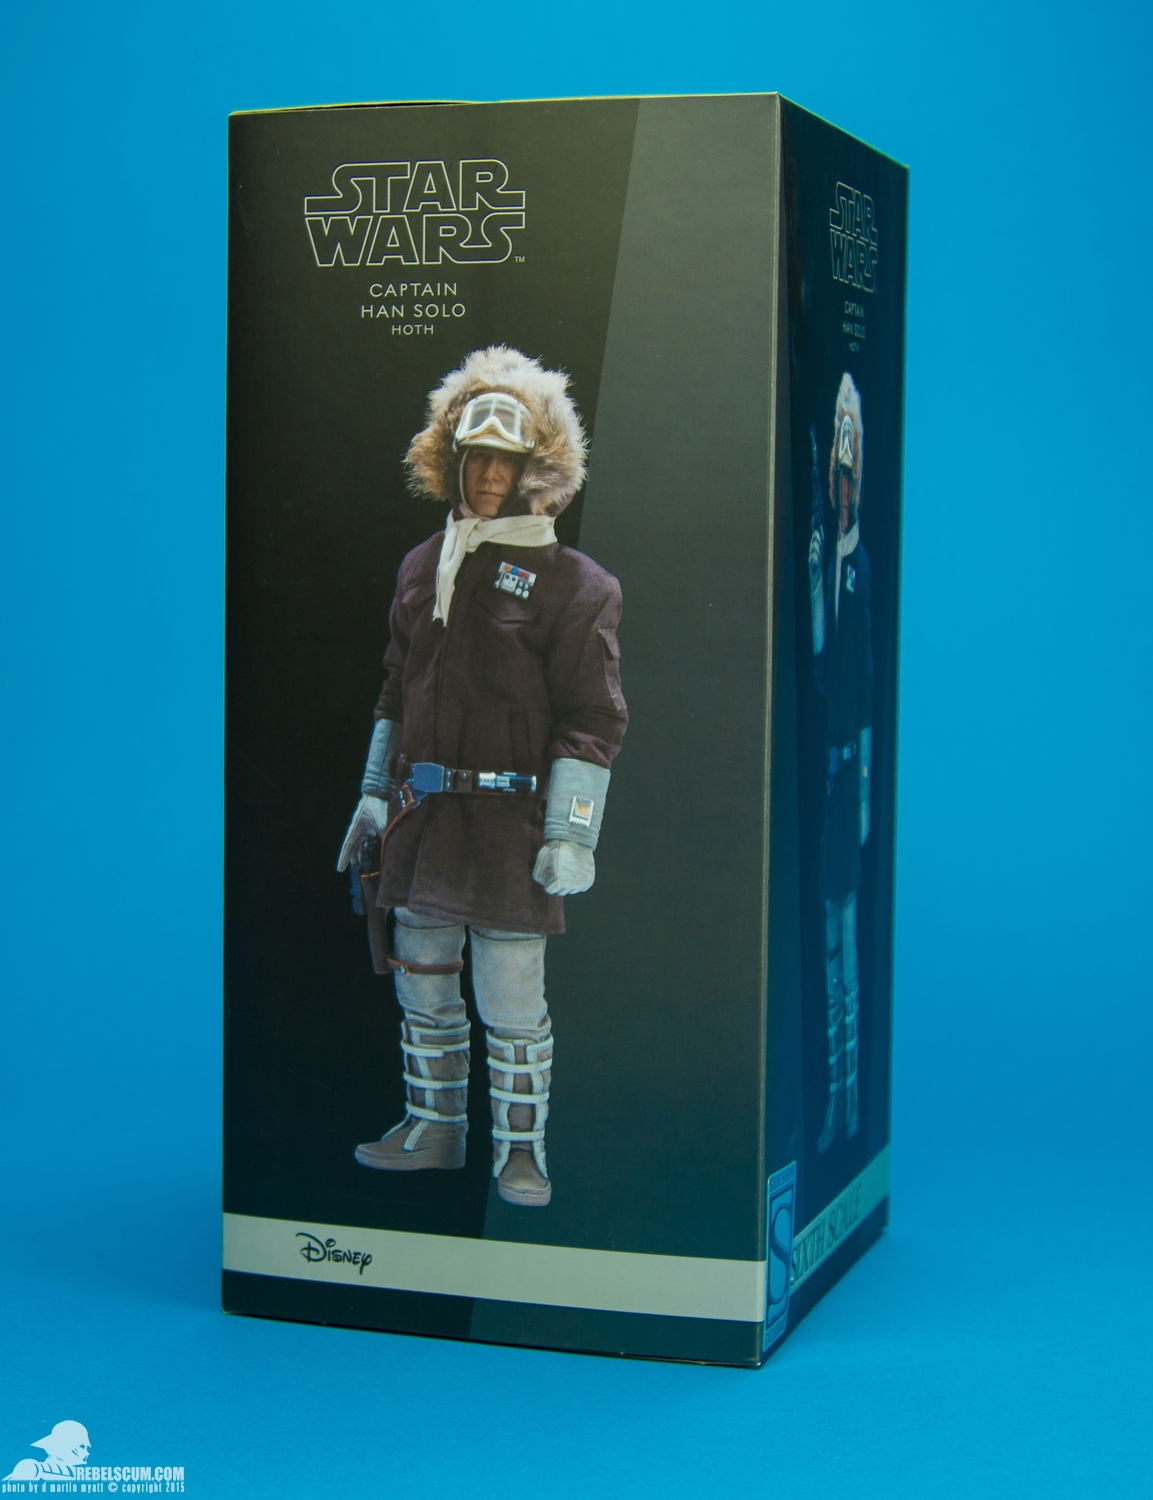 Han-Solo-Hoth-Brown-Sixth-Scale-Sideshow-Collectibles-Star-Wars-035.jpg